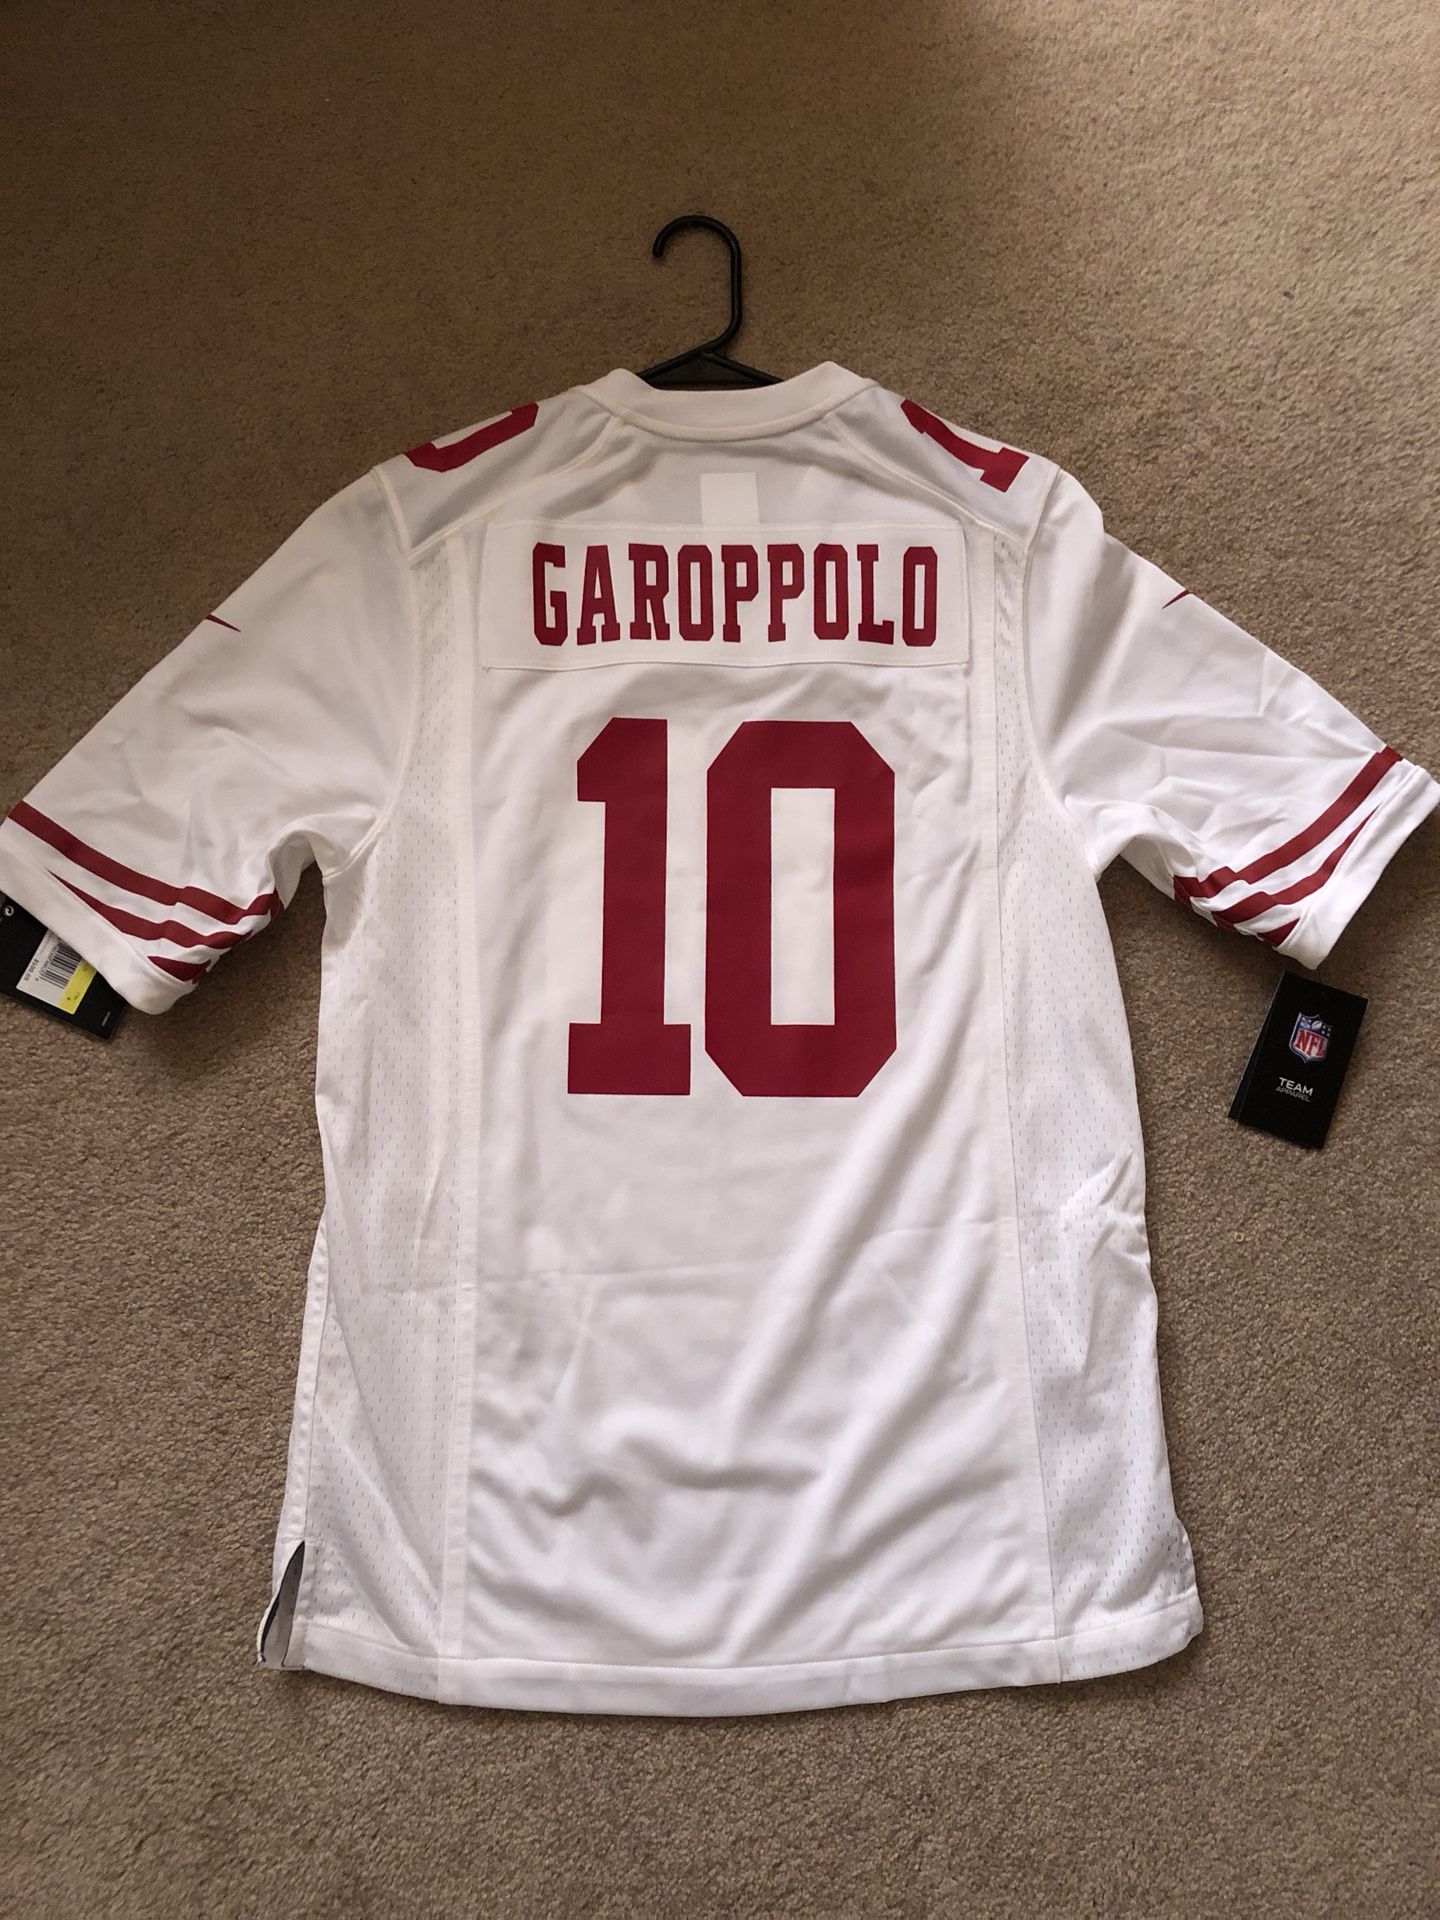 49ers Jimmy Garoppolo Jersey Nike Game for Sale in San Jose, CA